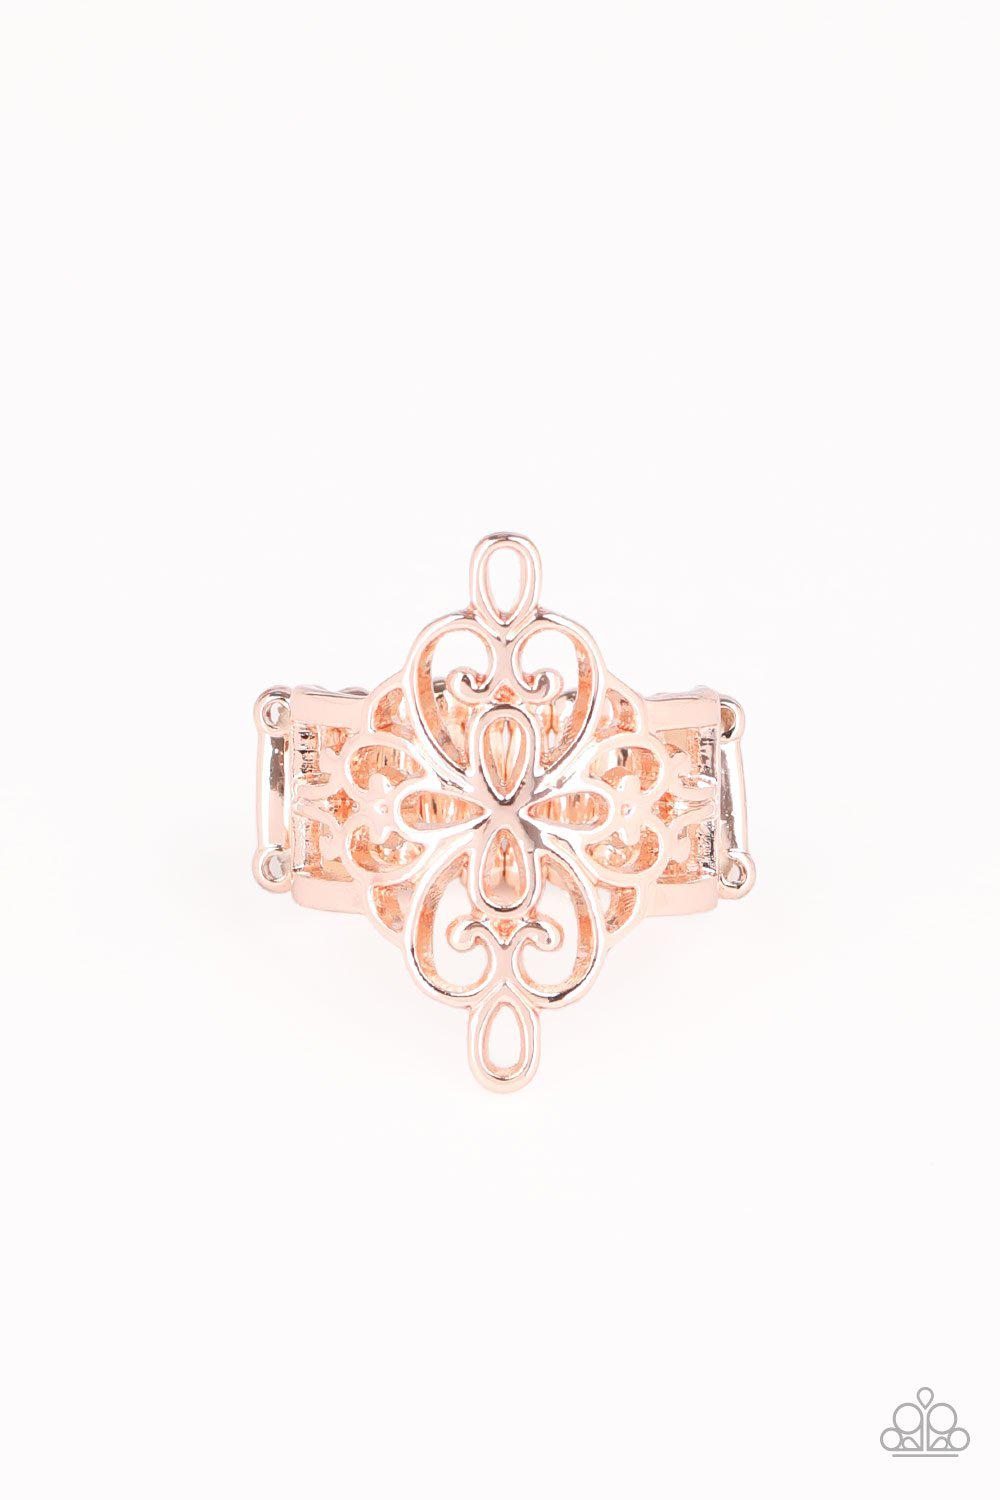 Walk The VINE Rose Gold Ring - Paparazzi Accessories - lightbox -CarasShop.com - $5 Jewelry by Cara Jewels